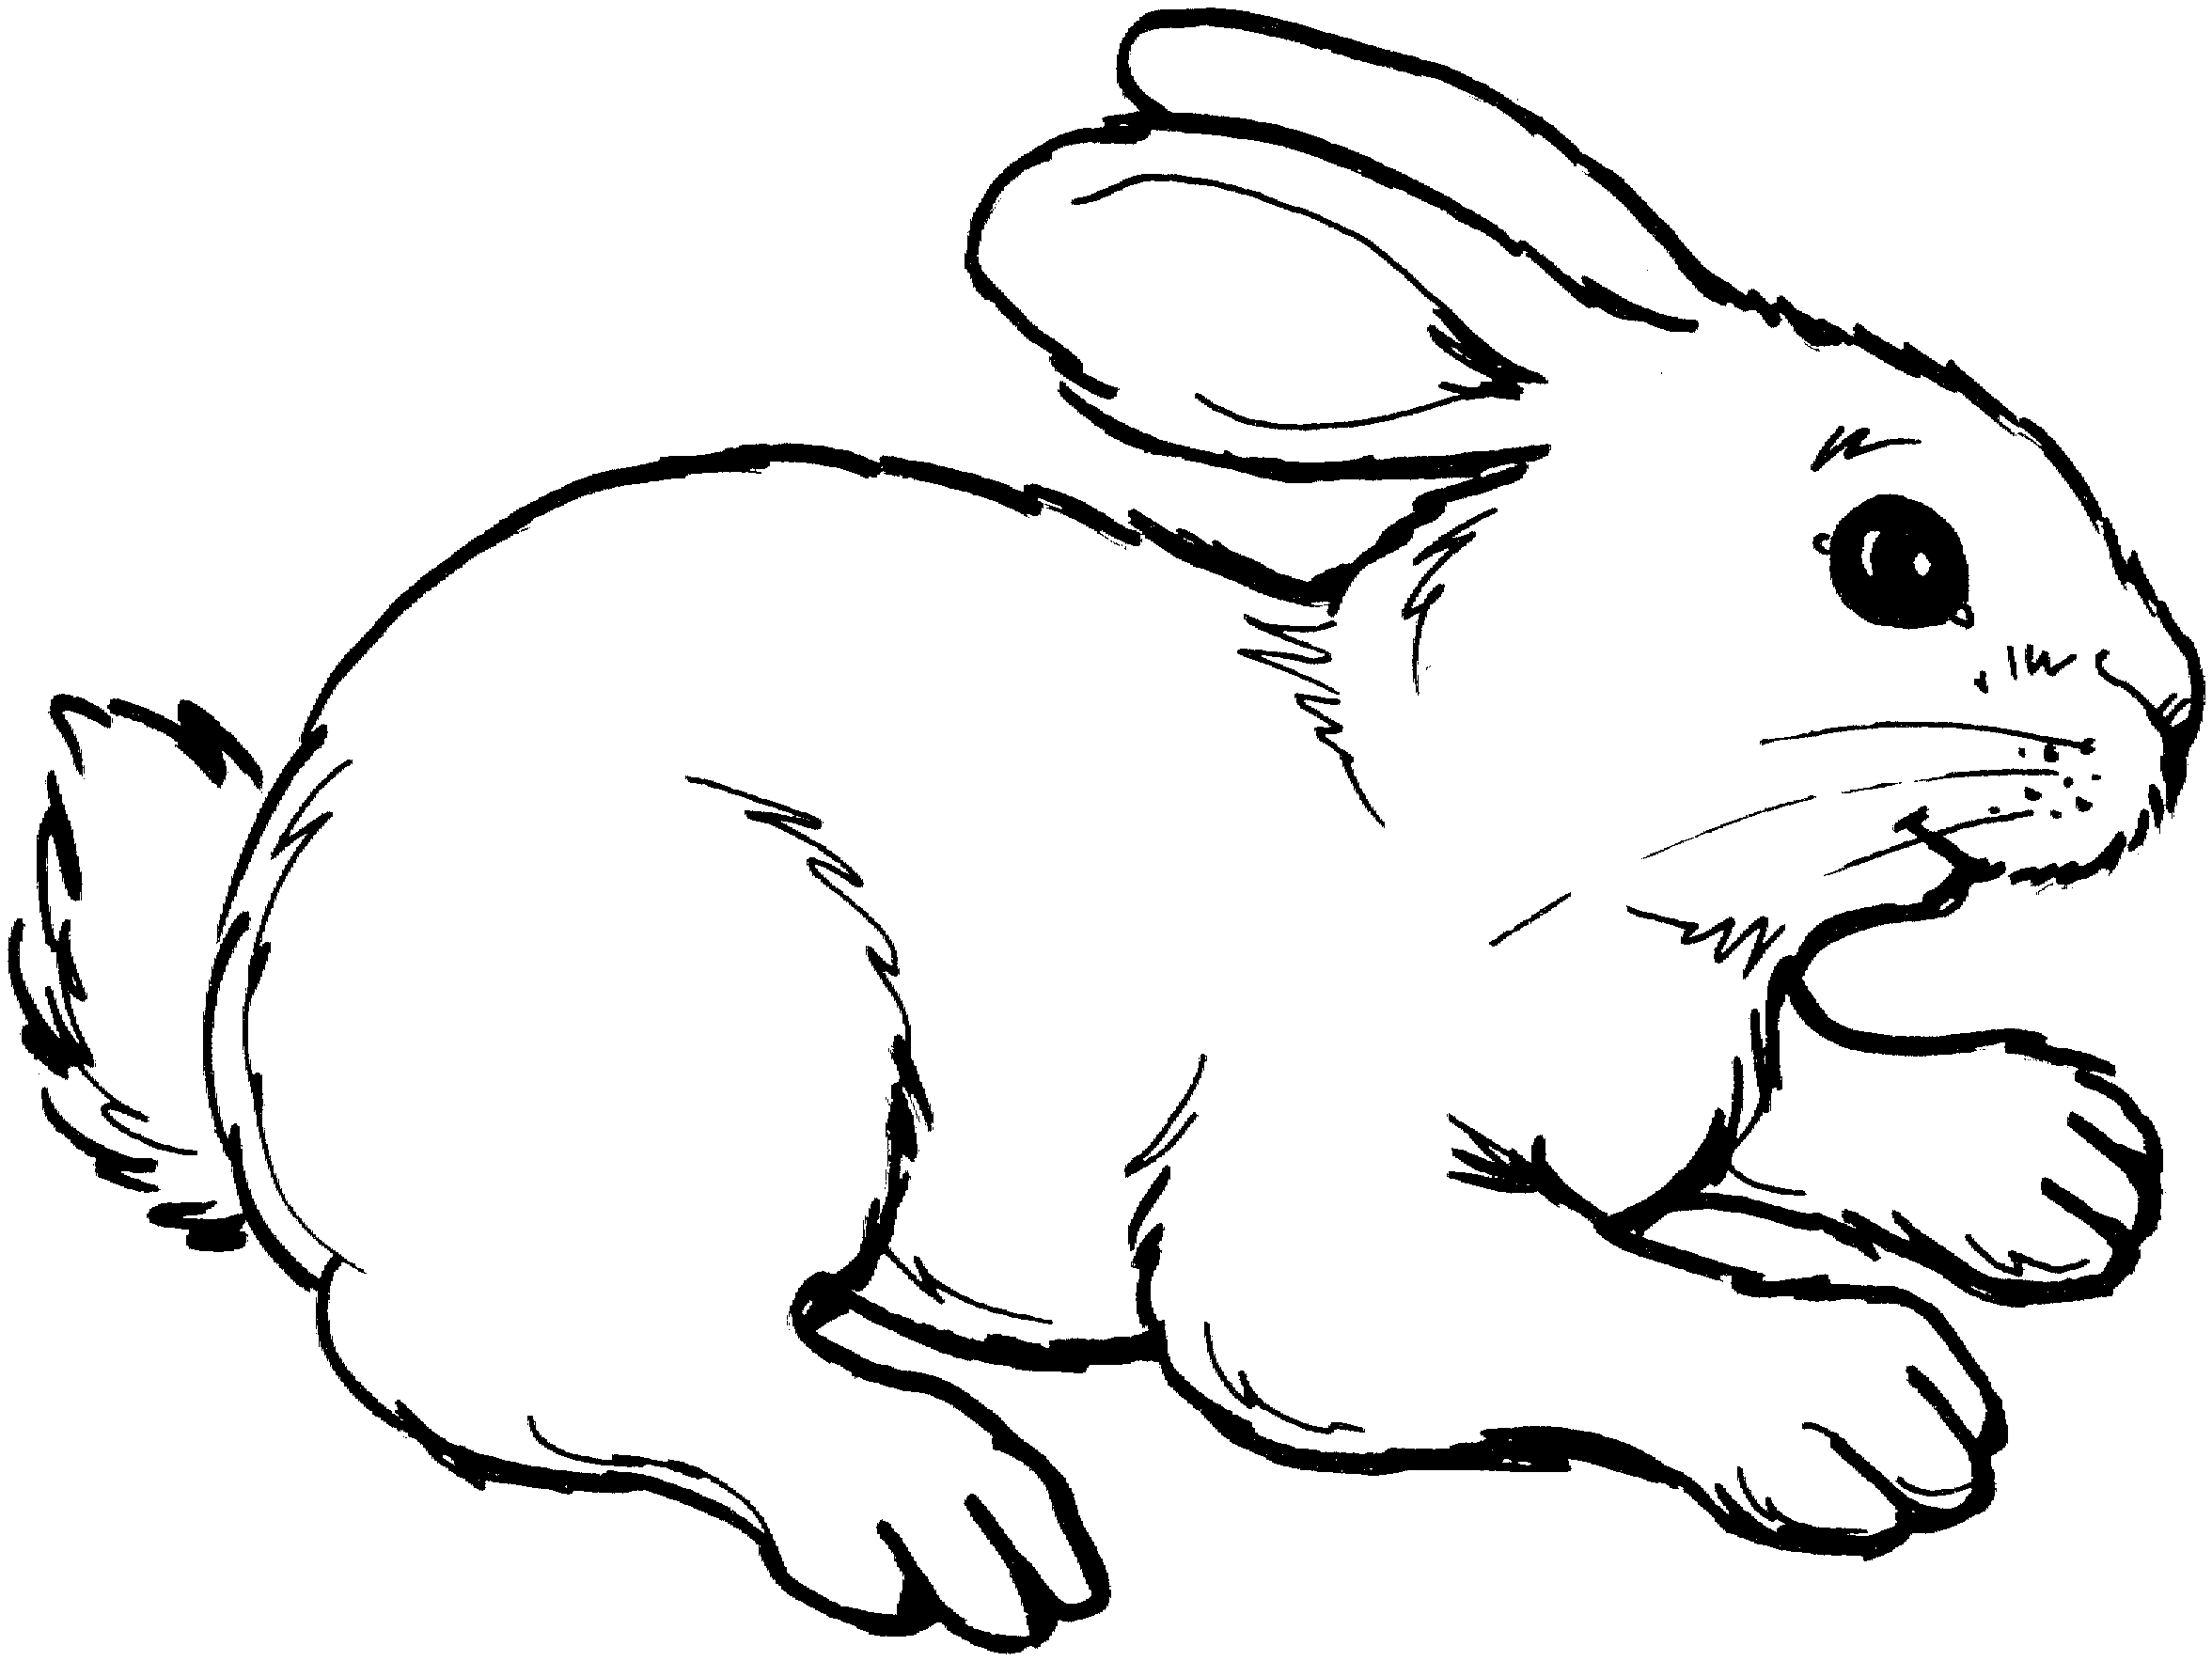 Bunny black and white rabbit clipart